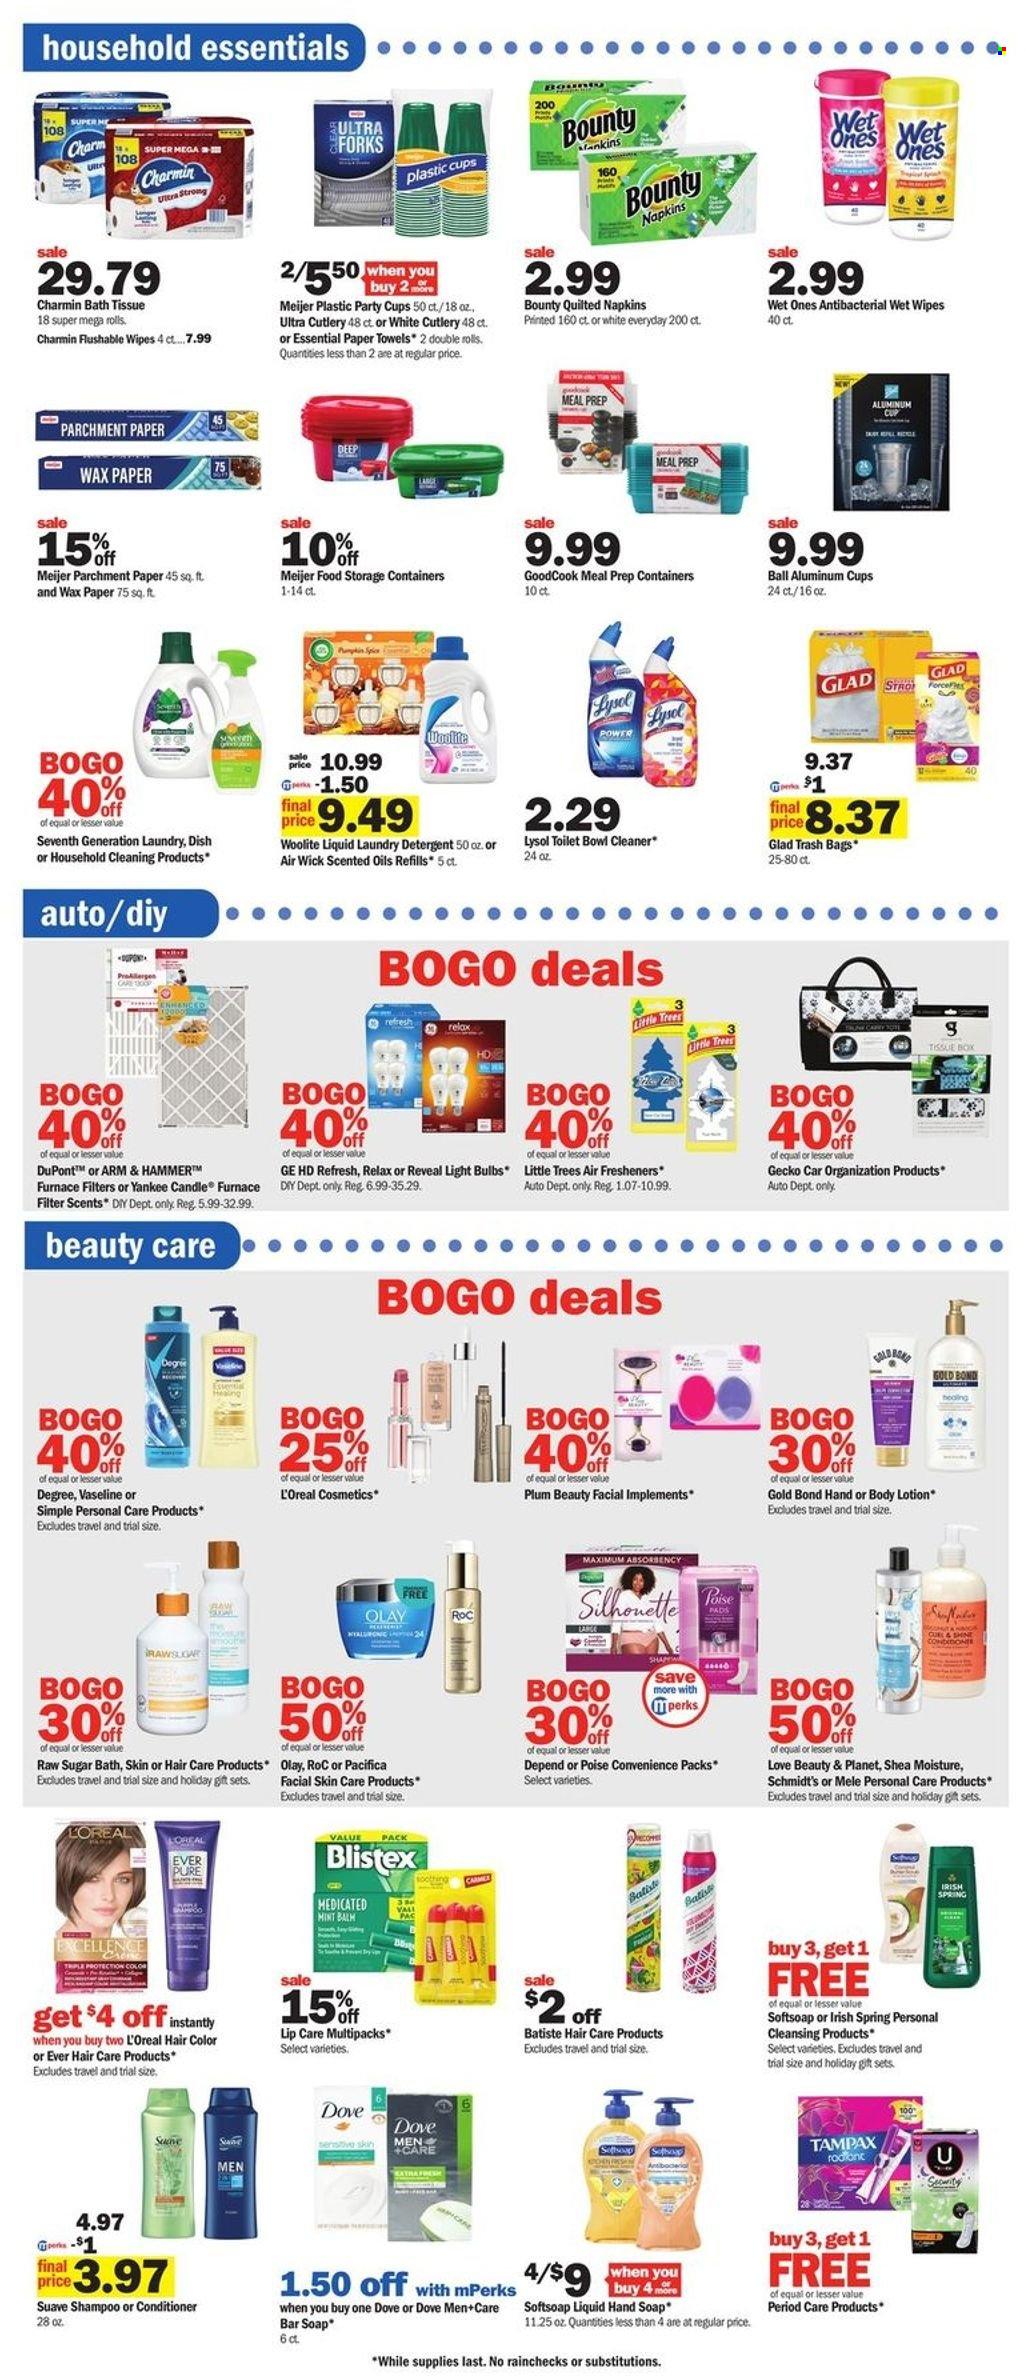 thumbnail - Meijer Flyer - 11/27/2022 - 12/03/2022 - Sales products - Dove, Bounty, spice, wipes, napkins, bath tissue, kitchen towels, paper towels, Charmin, detergent, cleaner, Lysol, Woolite, laundry detergent, shampoo, Softsoap, Suave, hand soap, Vaseline, soap bar, Raw Sugar, soap, Tampax, L’Oréal, Olay, conditioner, hair color, body lotion, trash bags, cup, storage box, candle, Yankee Candle, air freshener, Air Wick, party cups, bulb, light bulb, pipe. Page 11.